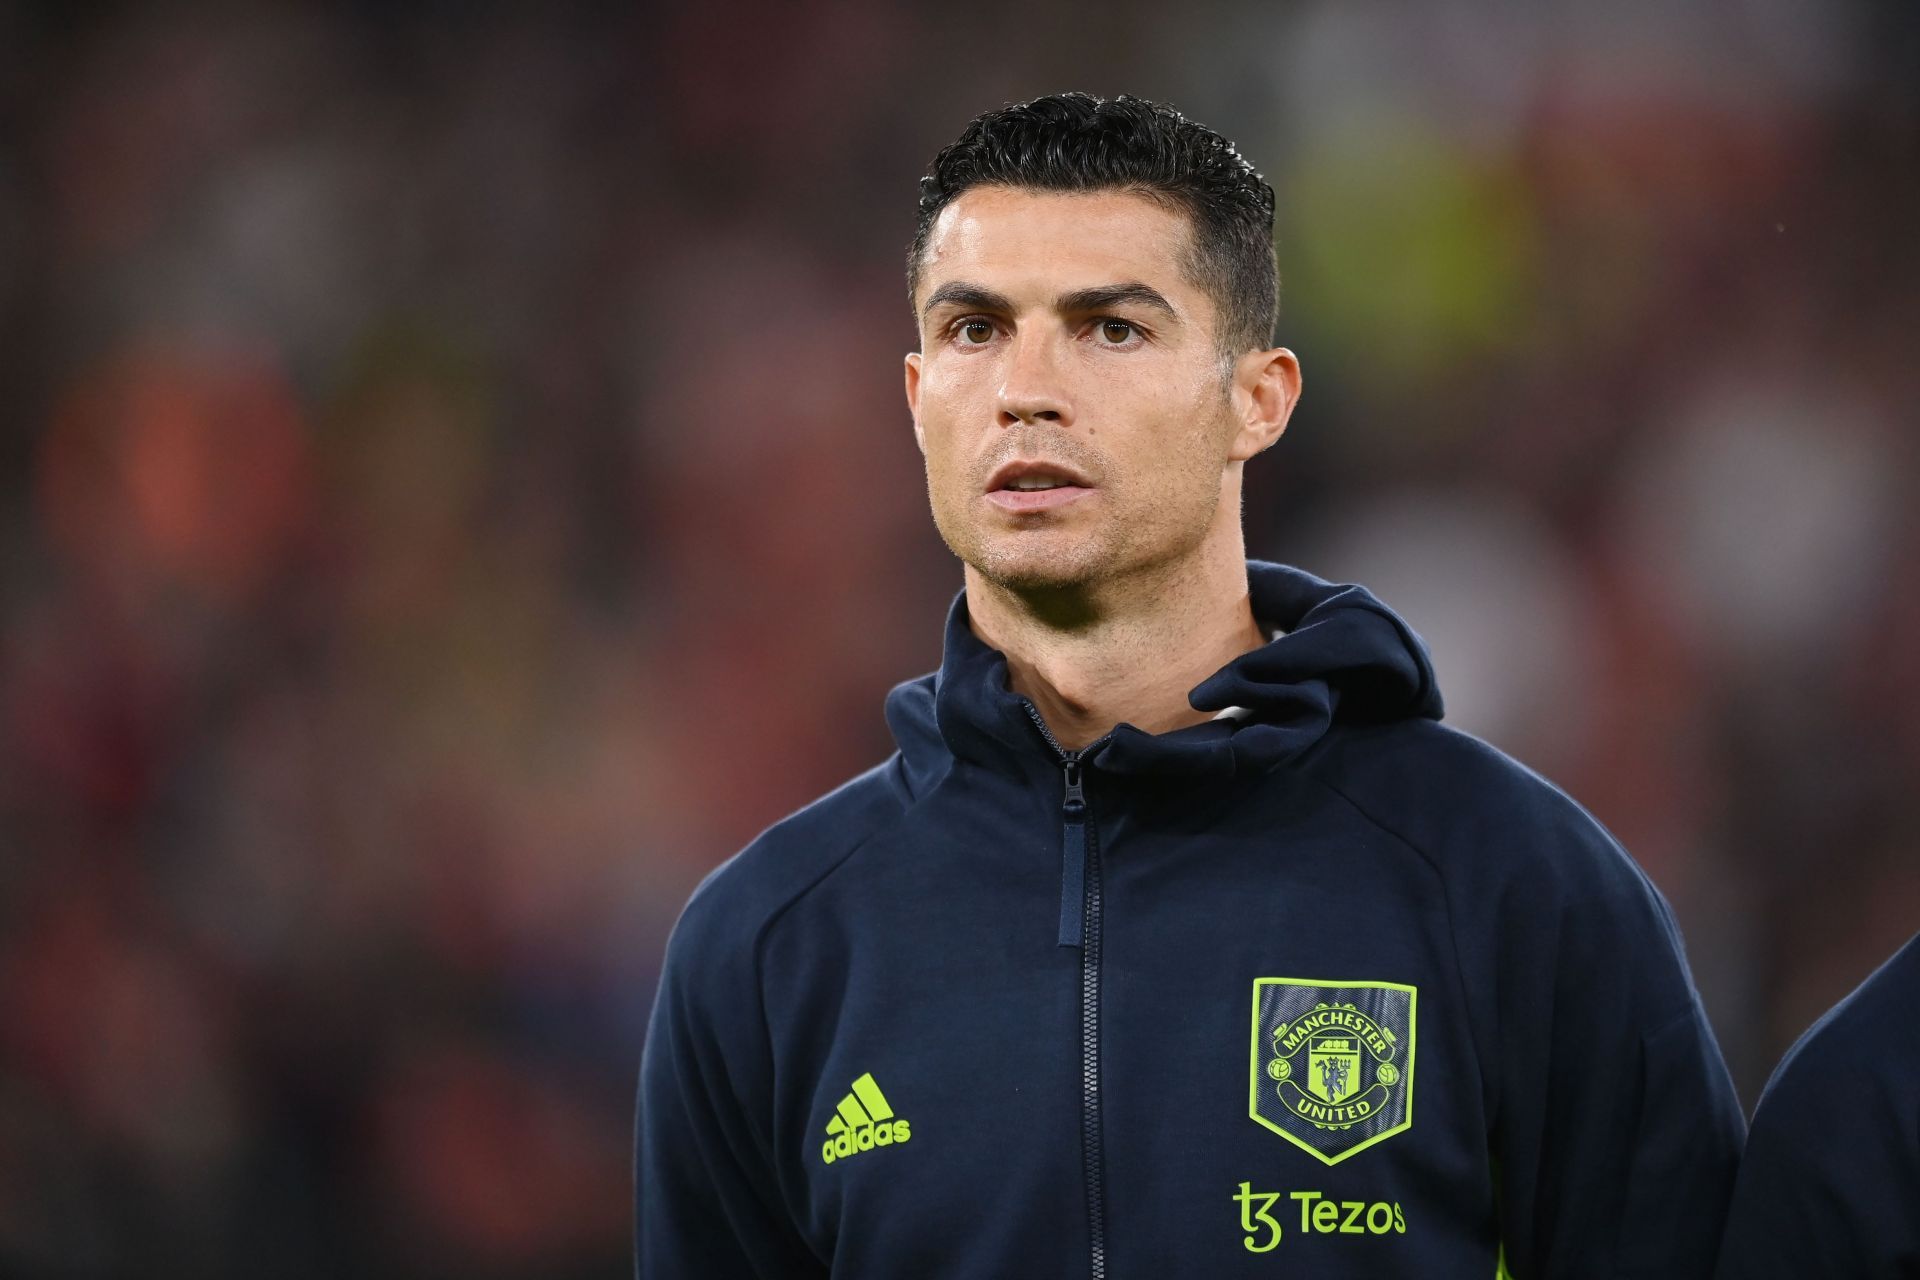 Cristiano Ronaldo has found game time difficult to come by at Old Trafford.